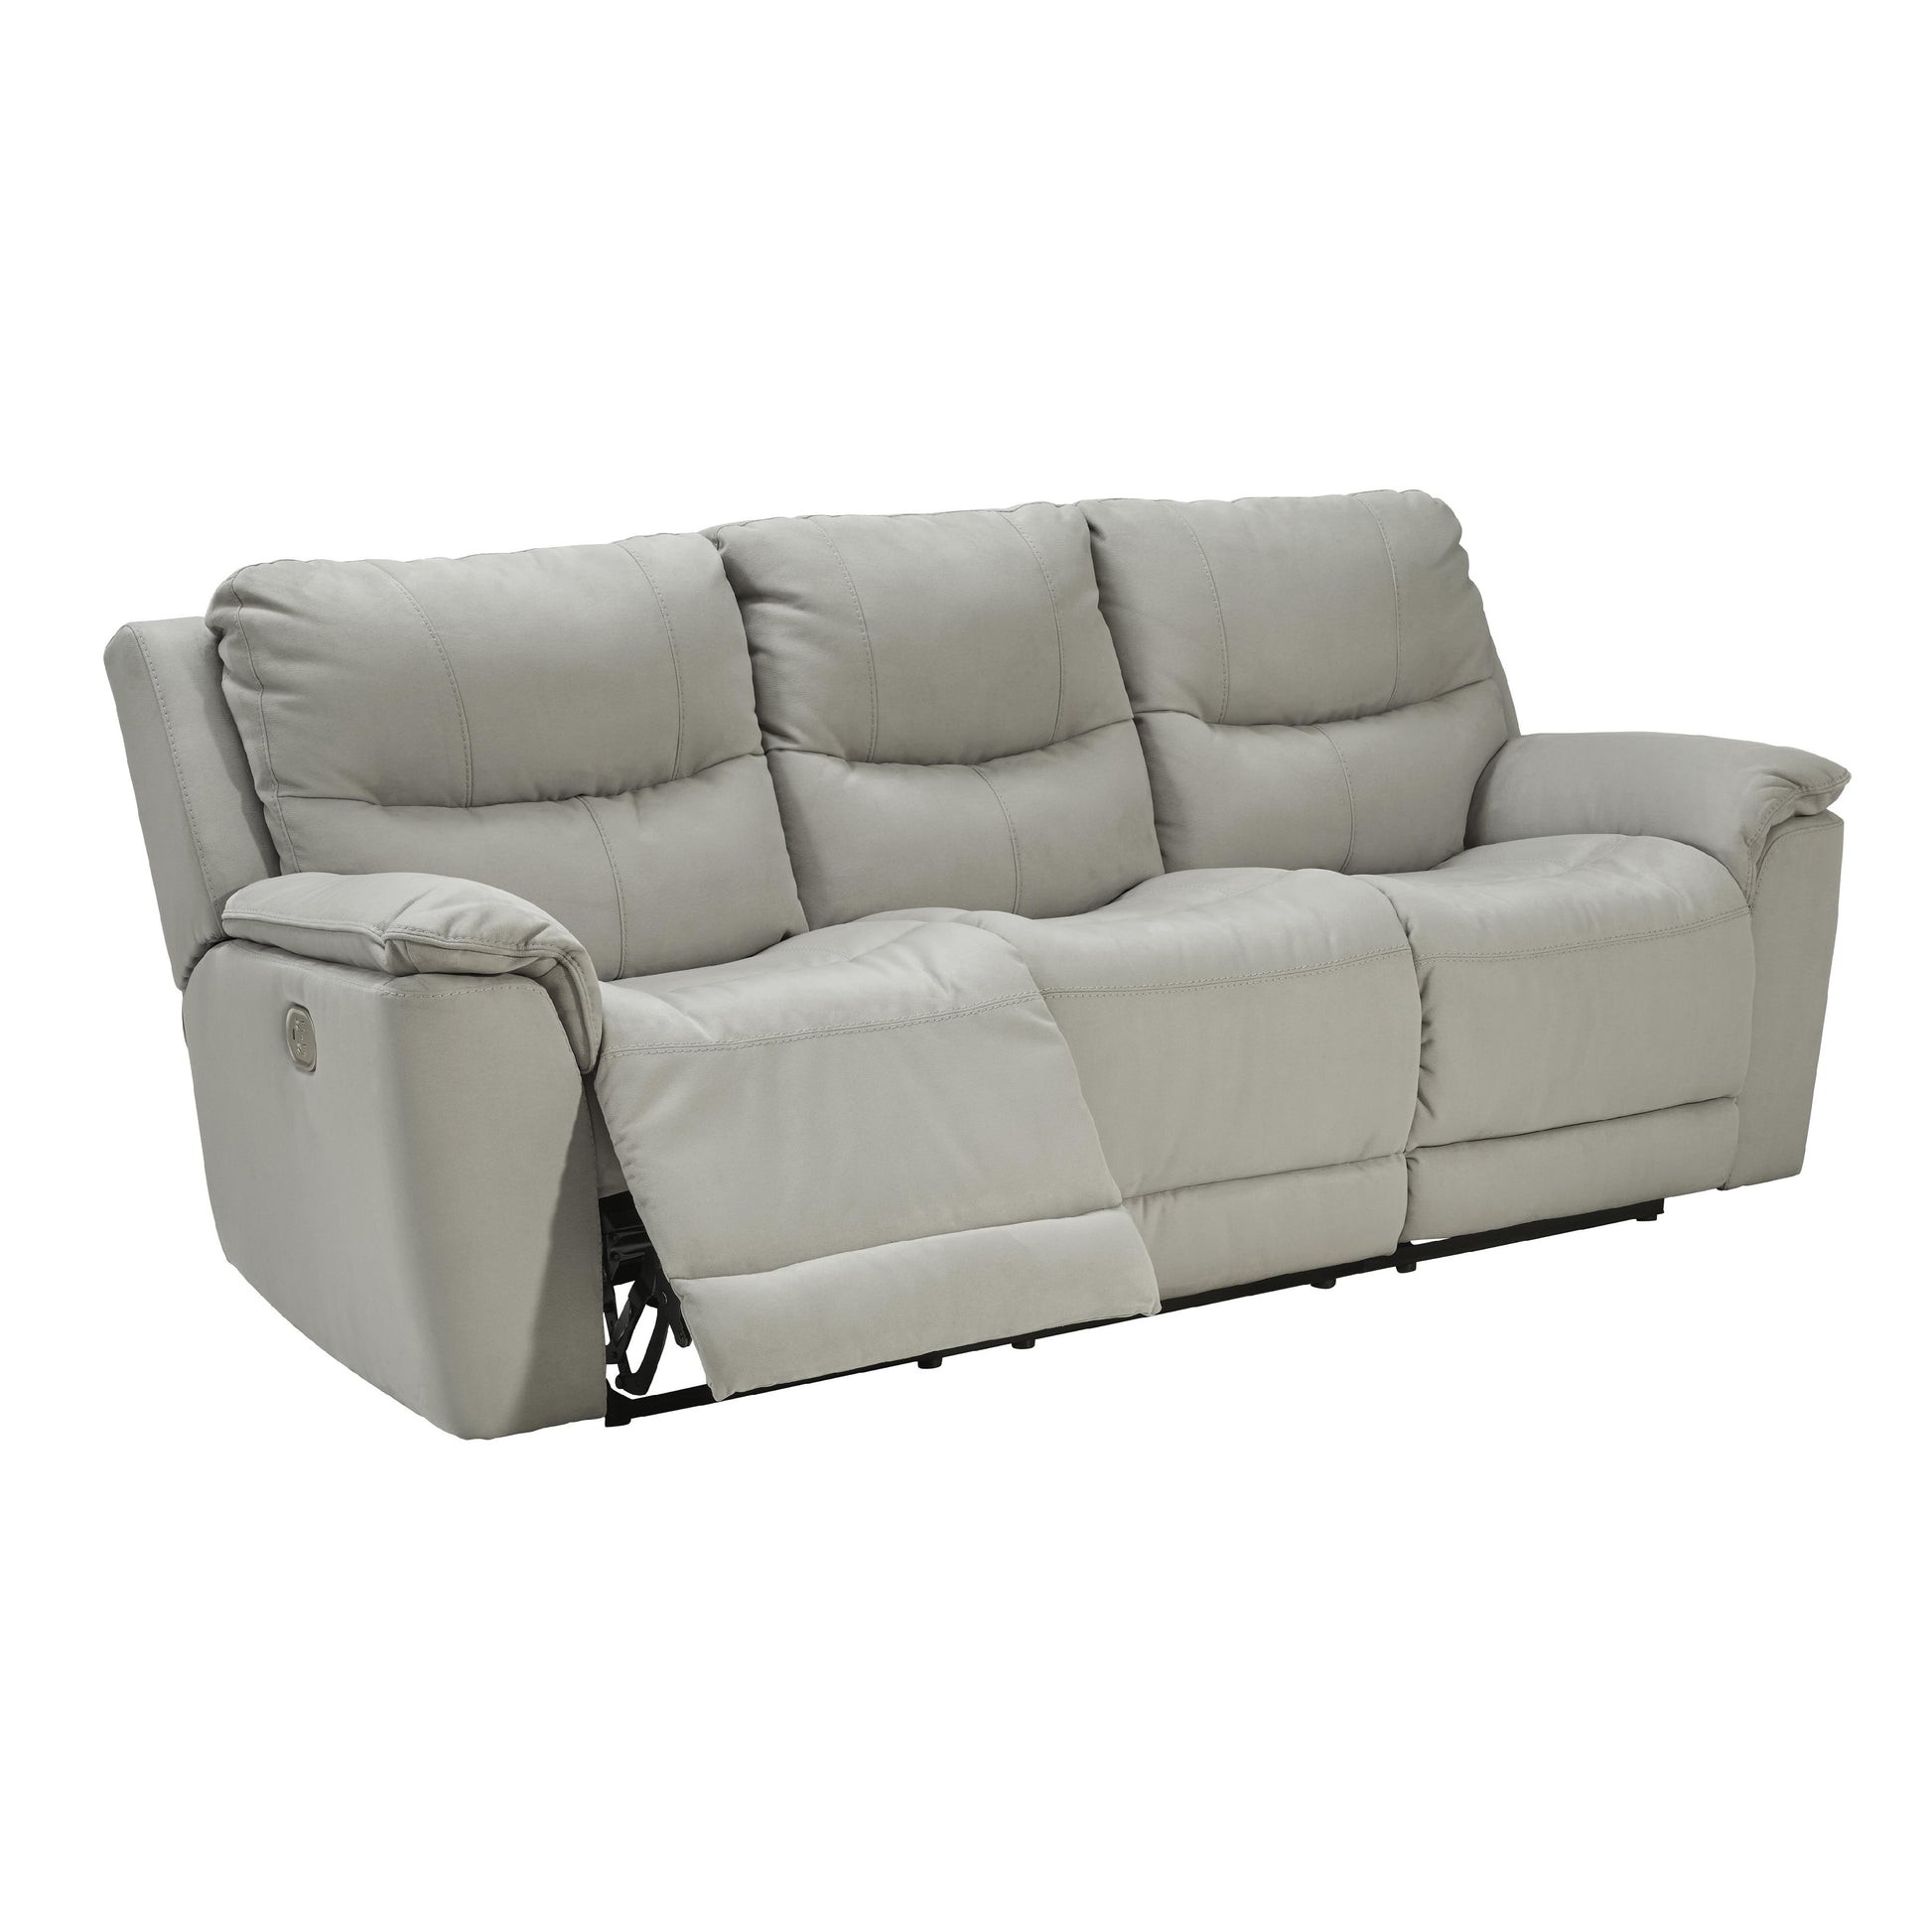 Signature Design by Ashley Next-Gen Gaucho Power Reclining Leather Look Sofa 6080615 IMAGE 2